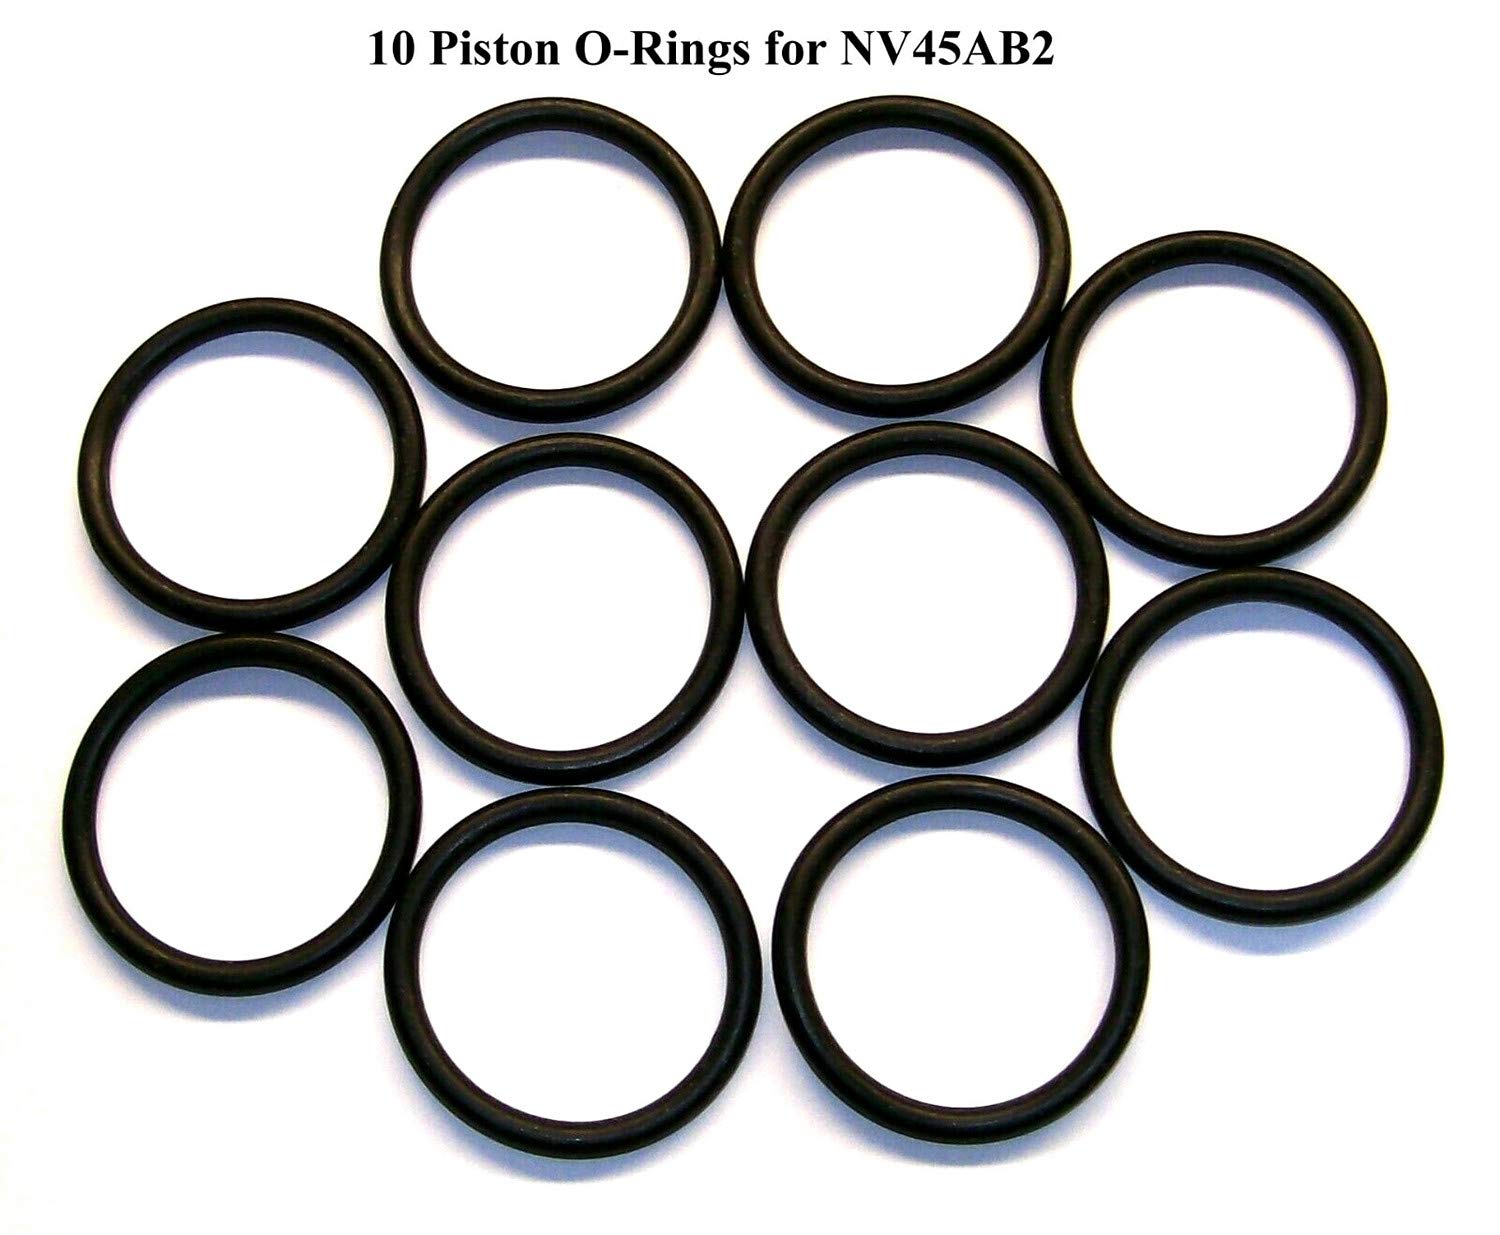 10 Pack Piston O-Rings for Hitachi Replaces Part Numbers 876-174 876174 and Fits Hitachi Nailer Models NV45AB2, N5008AC, NT65A2, NT50A